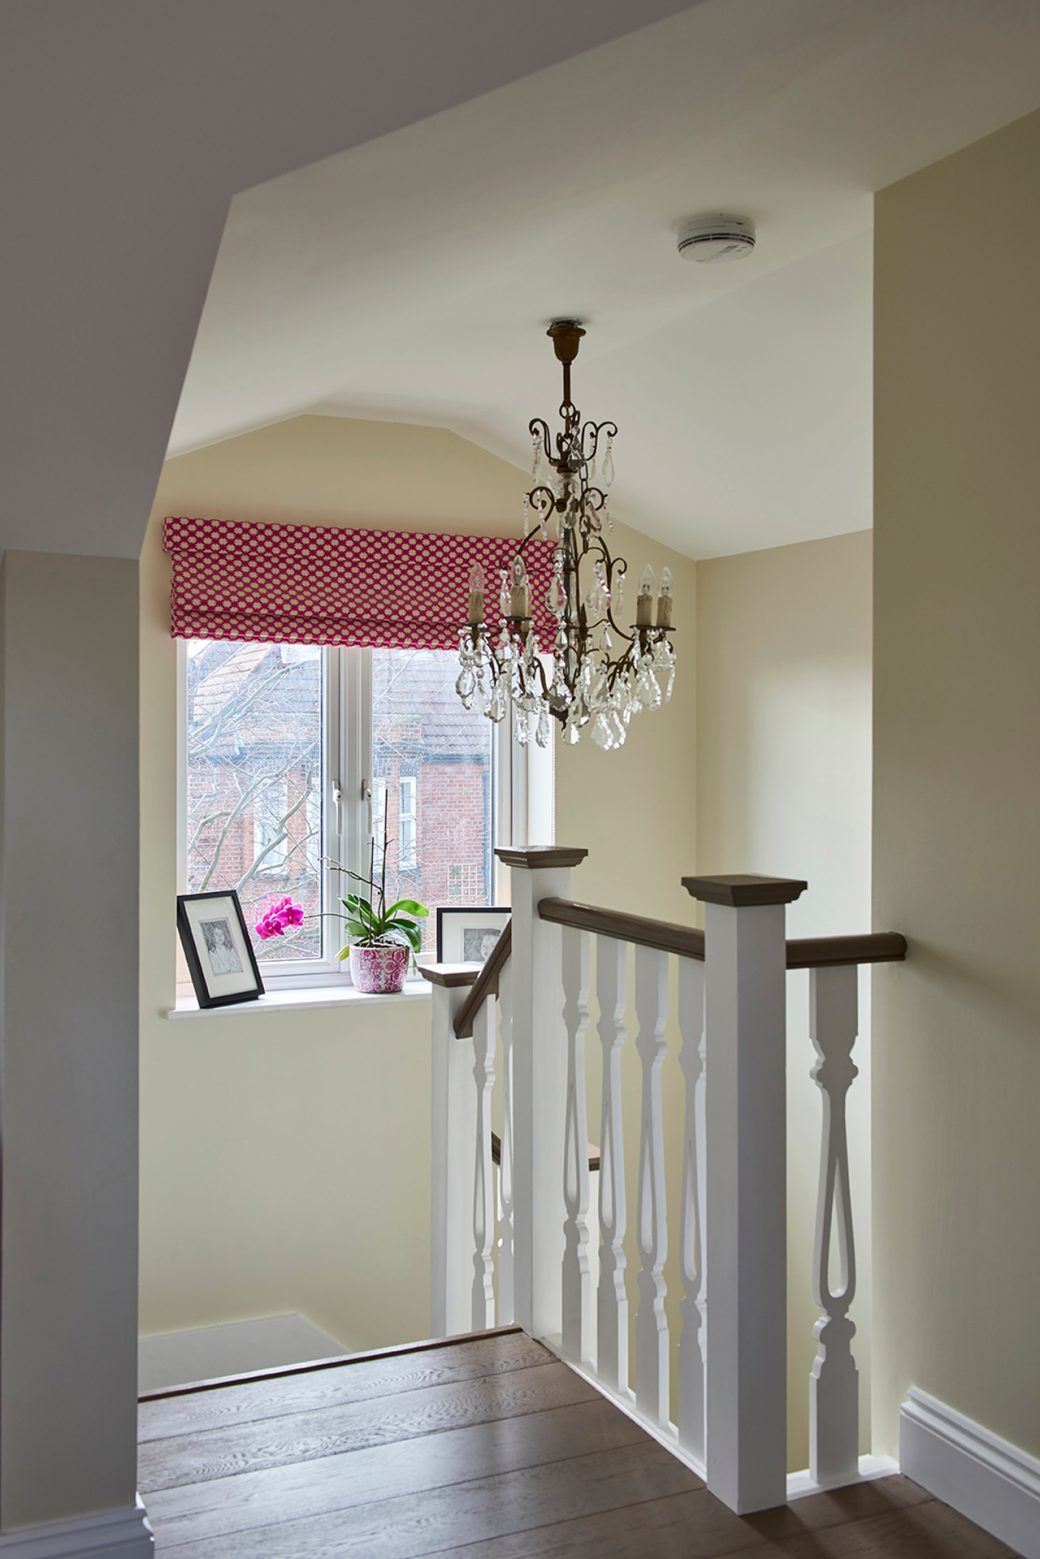 Top of stairs with chandelier